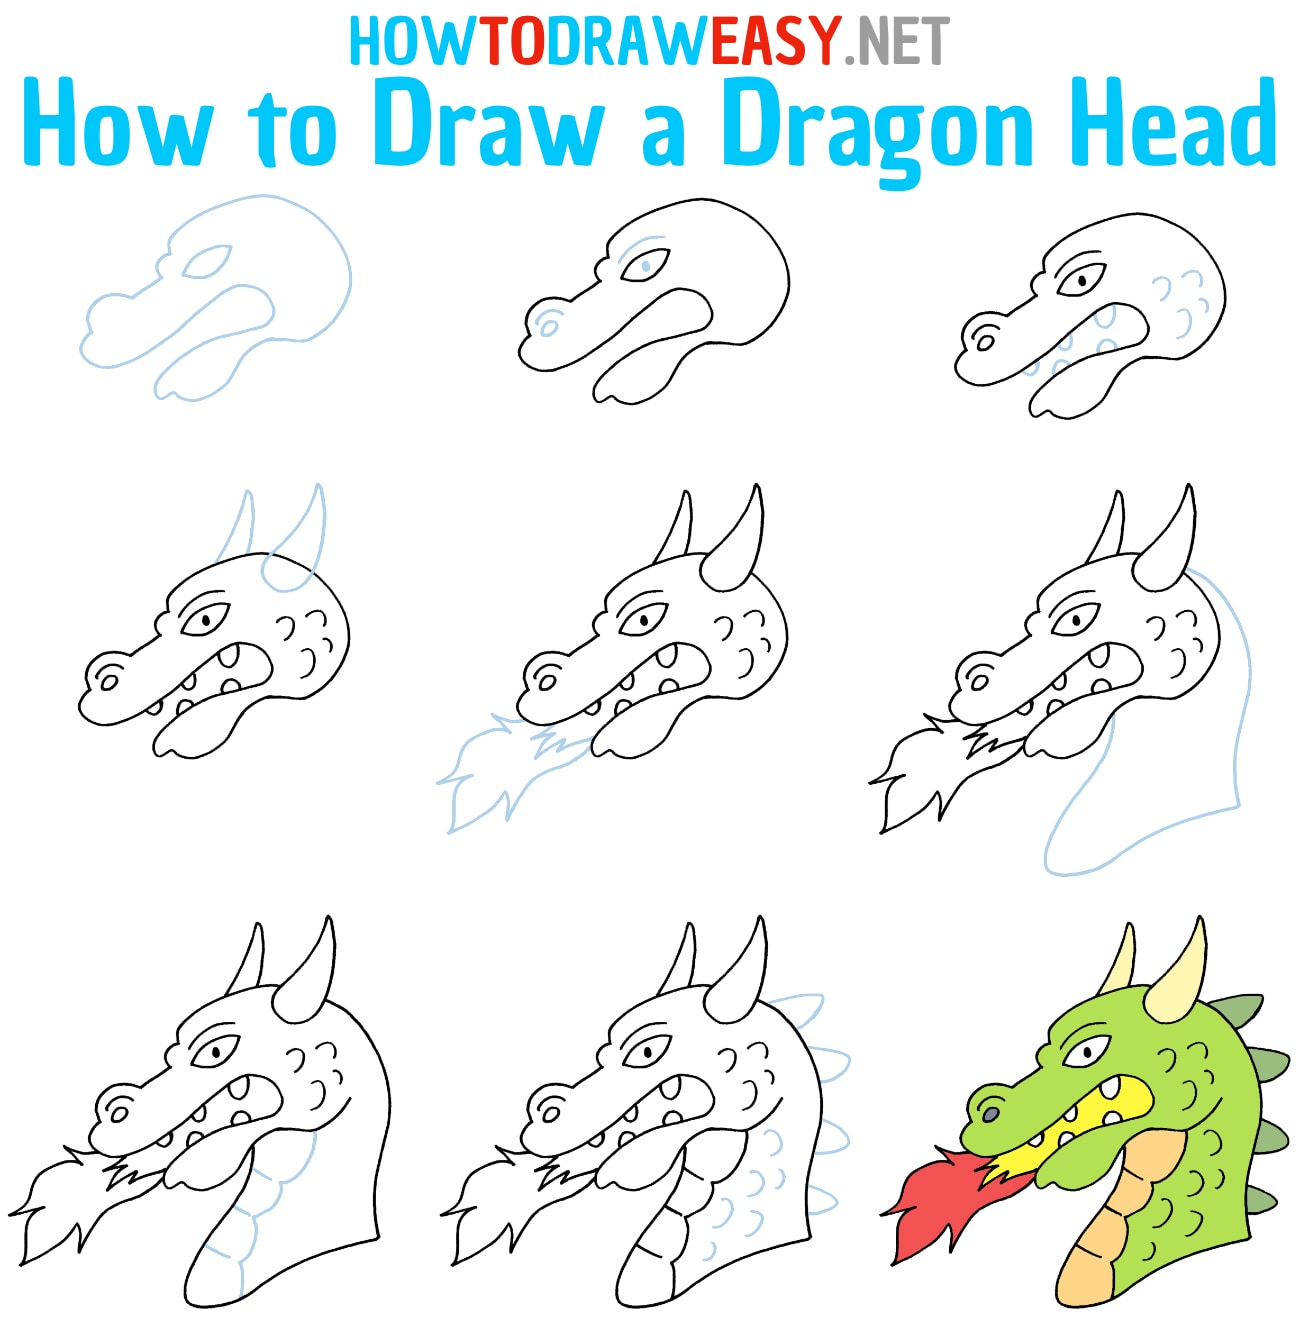 How to Draw a Dragon Head Step by Step